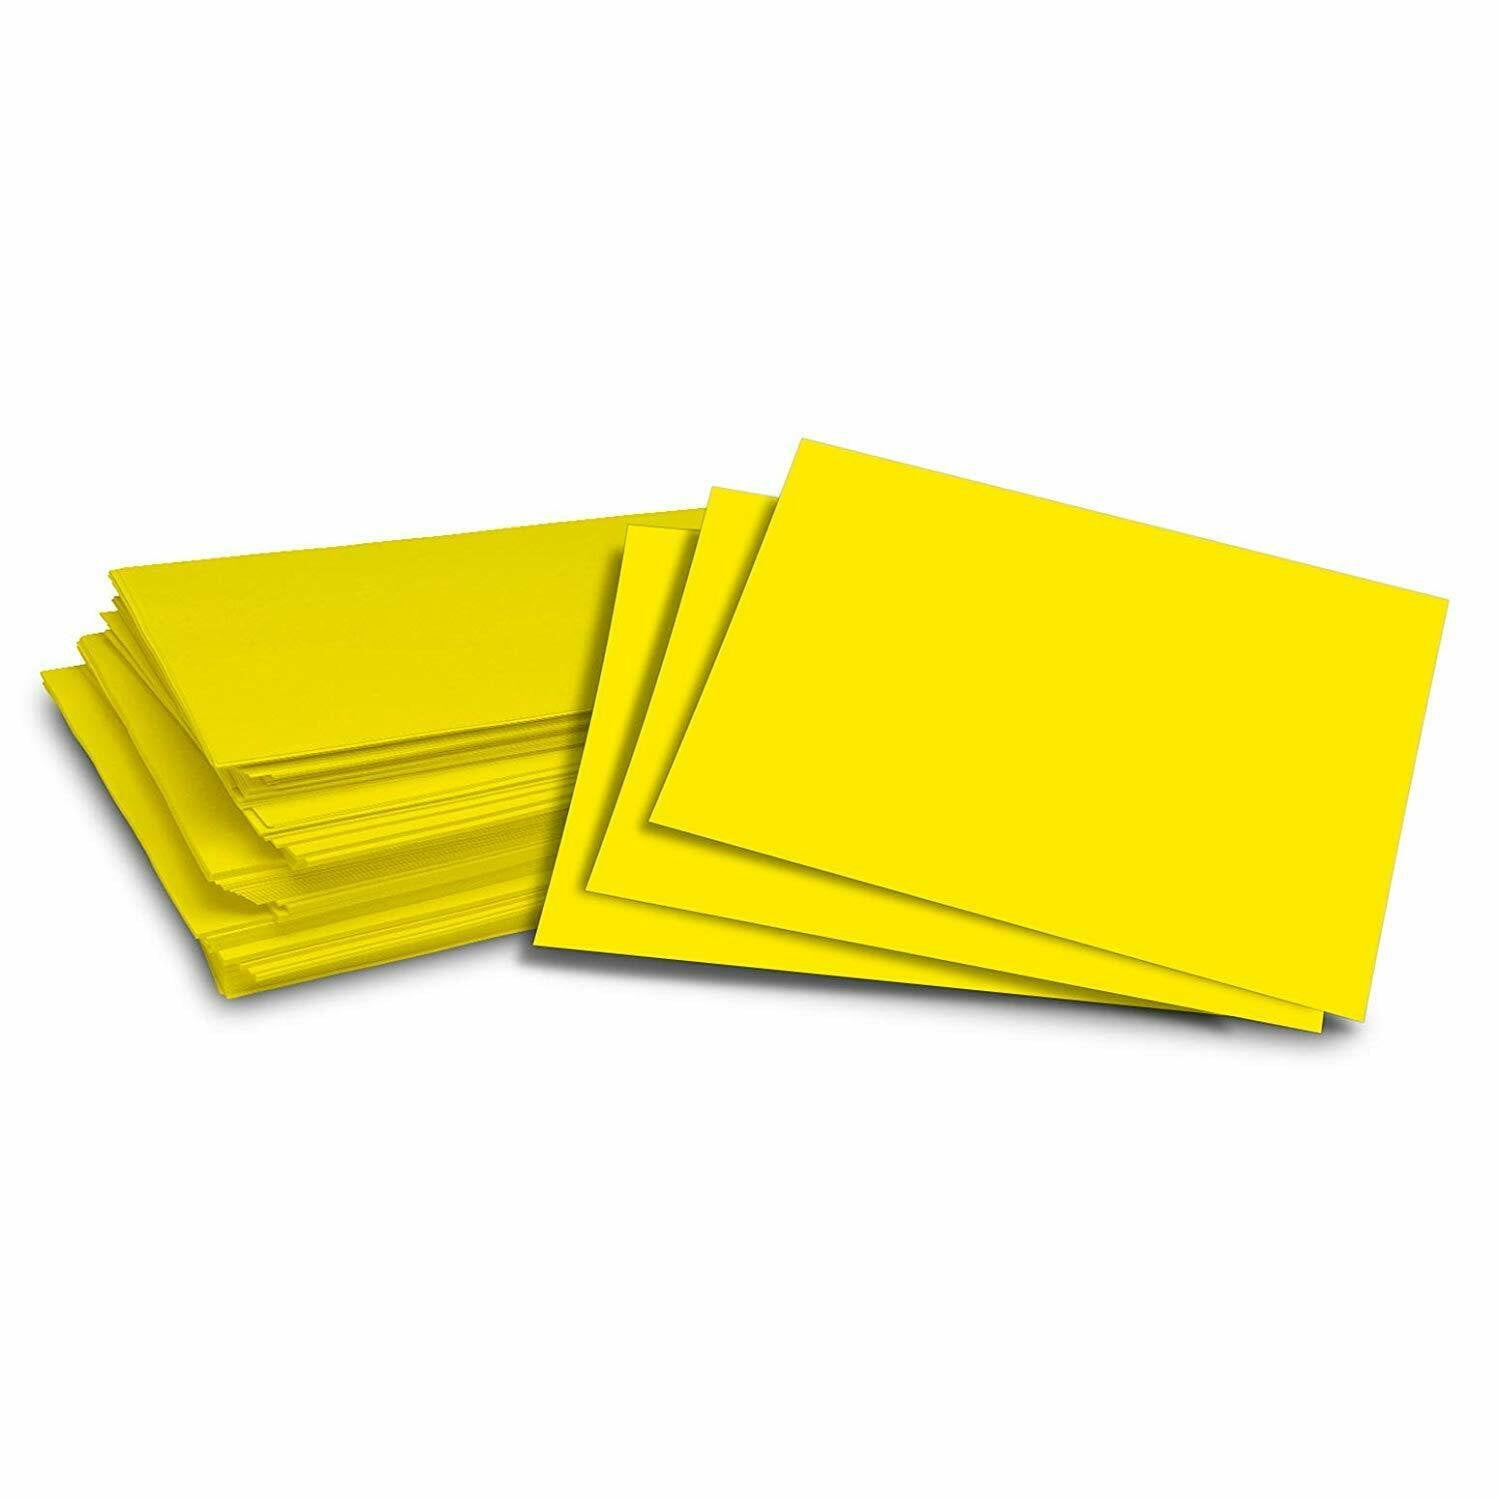 65 Pound Light Weight Cardstock Quality Printable Smooth Surface Statement Size Half Letter 5.5 X 8.5 5.5X8.5 Inches 100 Bright Golden Yellow 65lb Cover|Card Paper